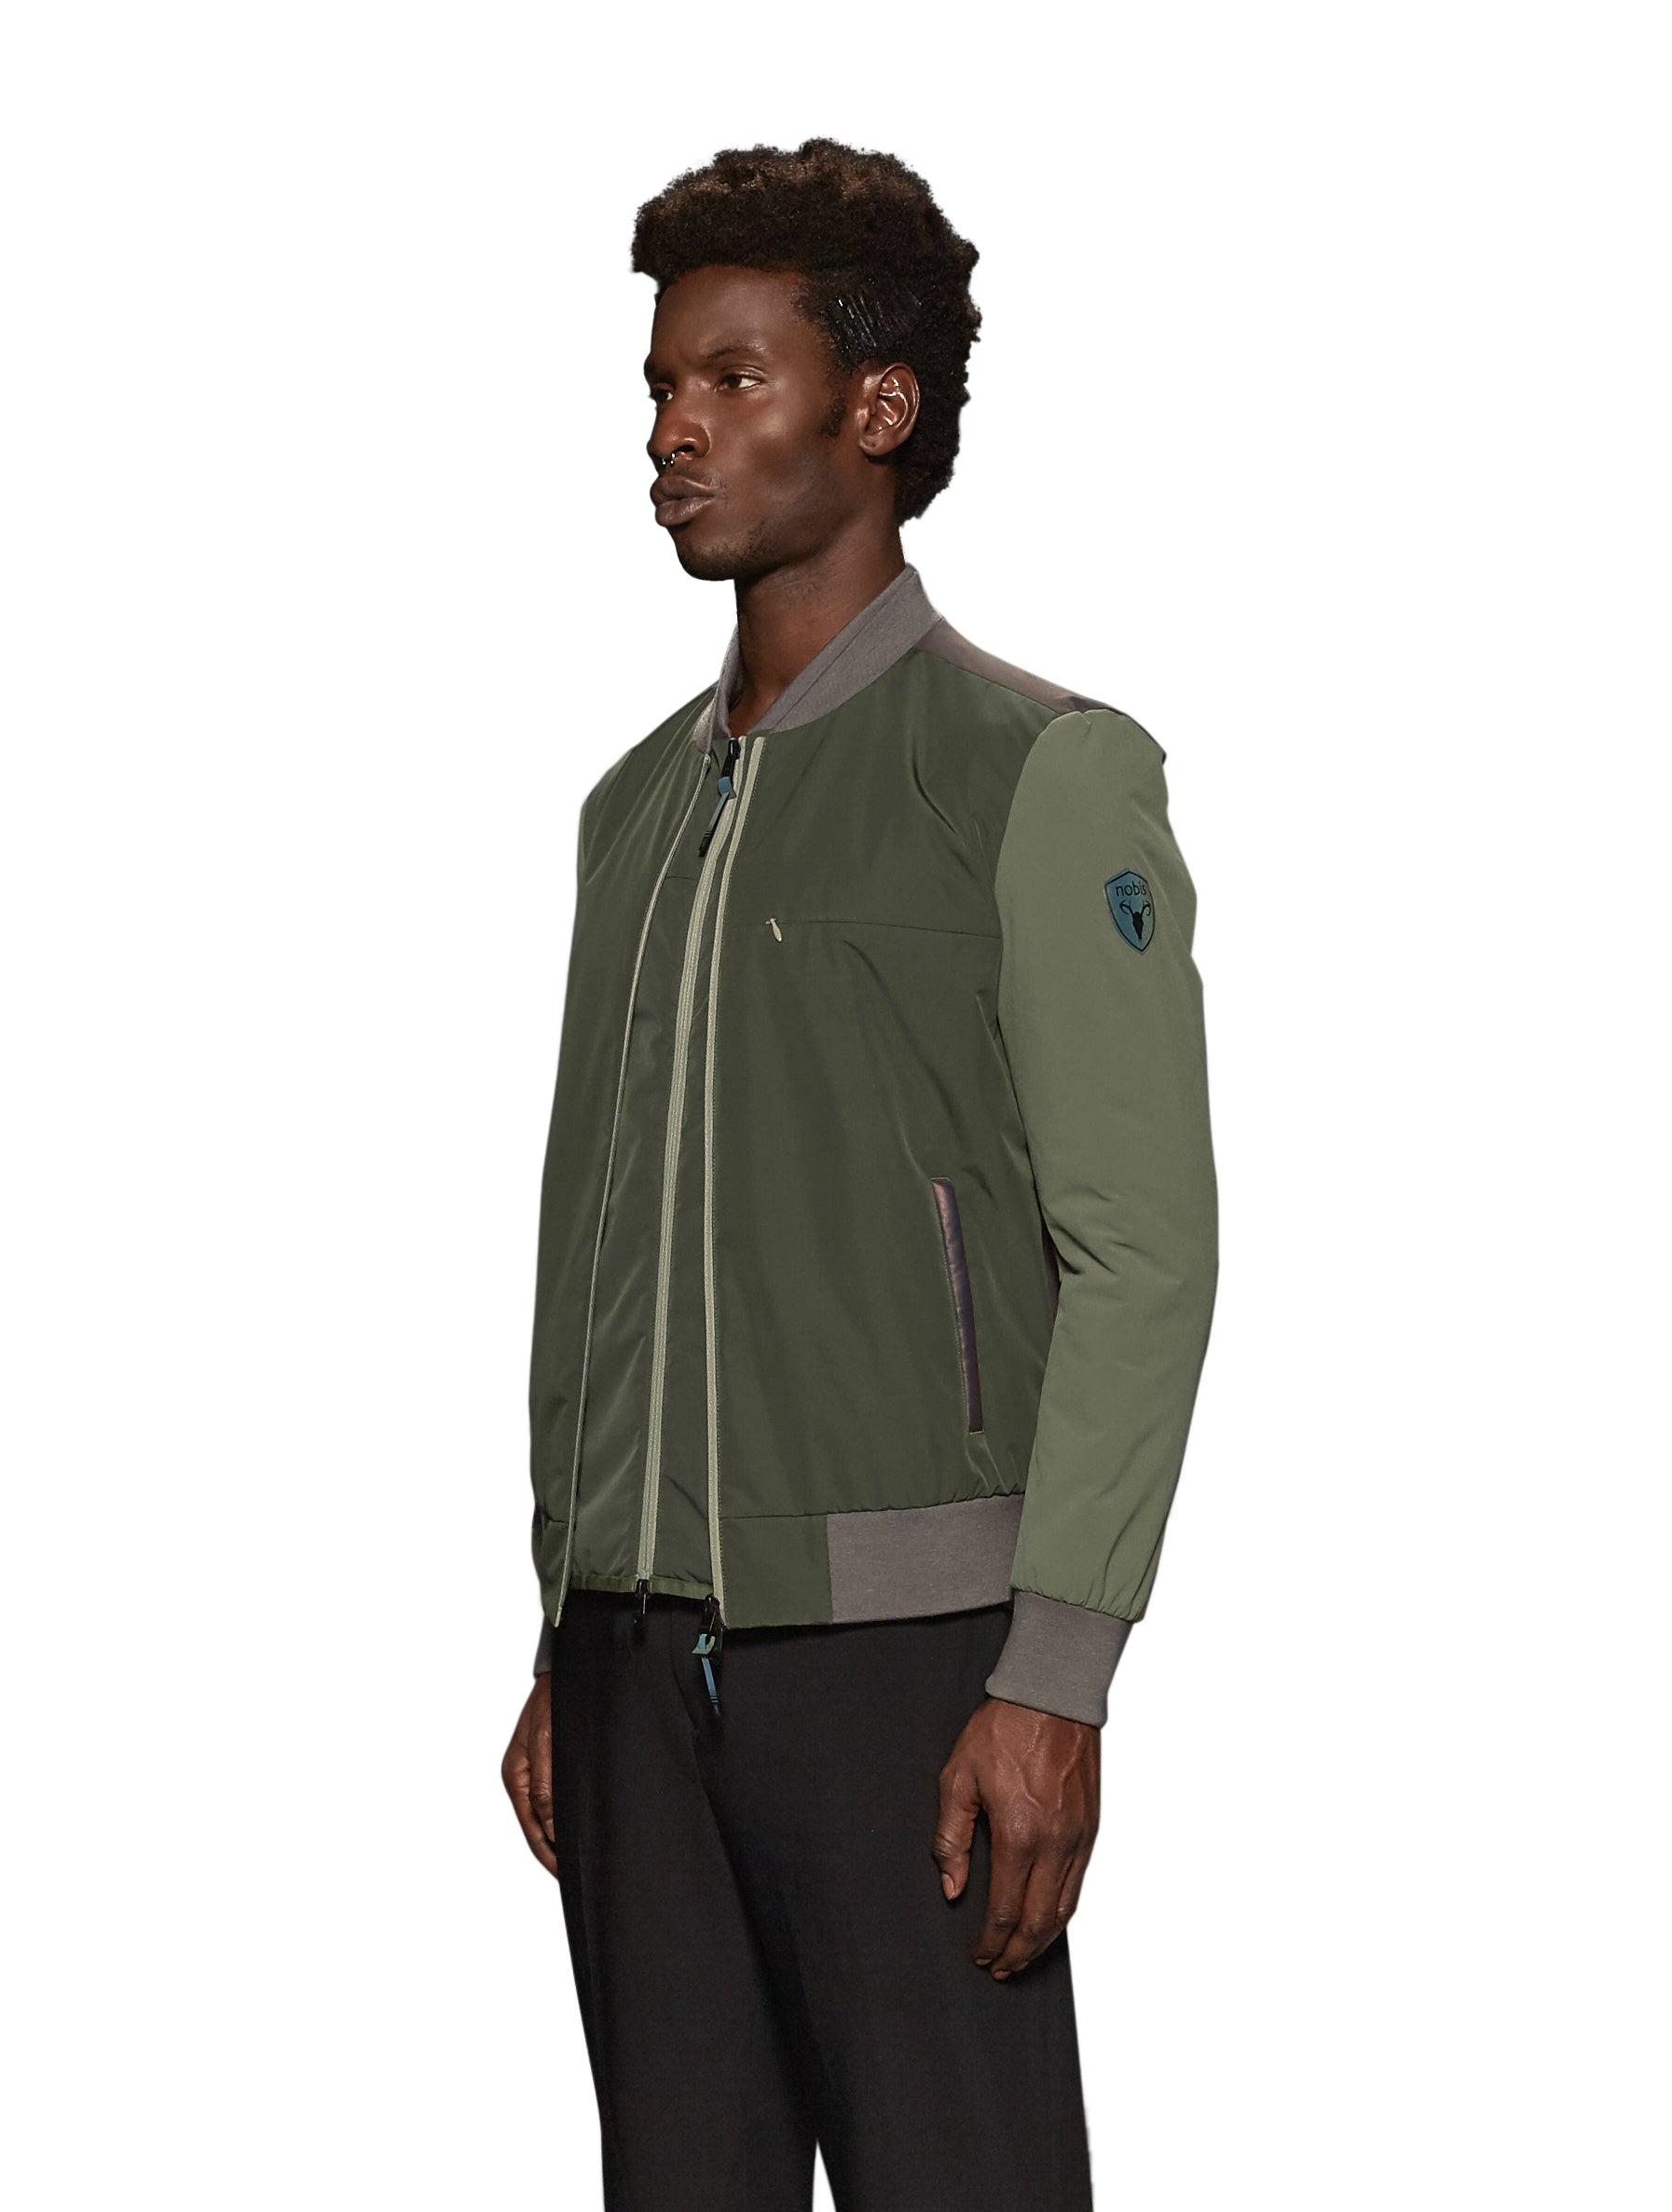 Unisex hip length bomber jacket with a contrast colour back panel, and zipper pockets at waist and an invisible zipper pocket at chest, in Dusty Olive/Licorice